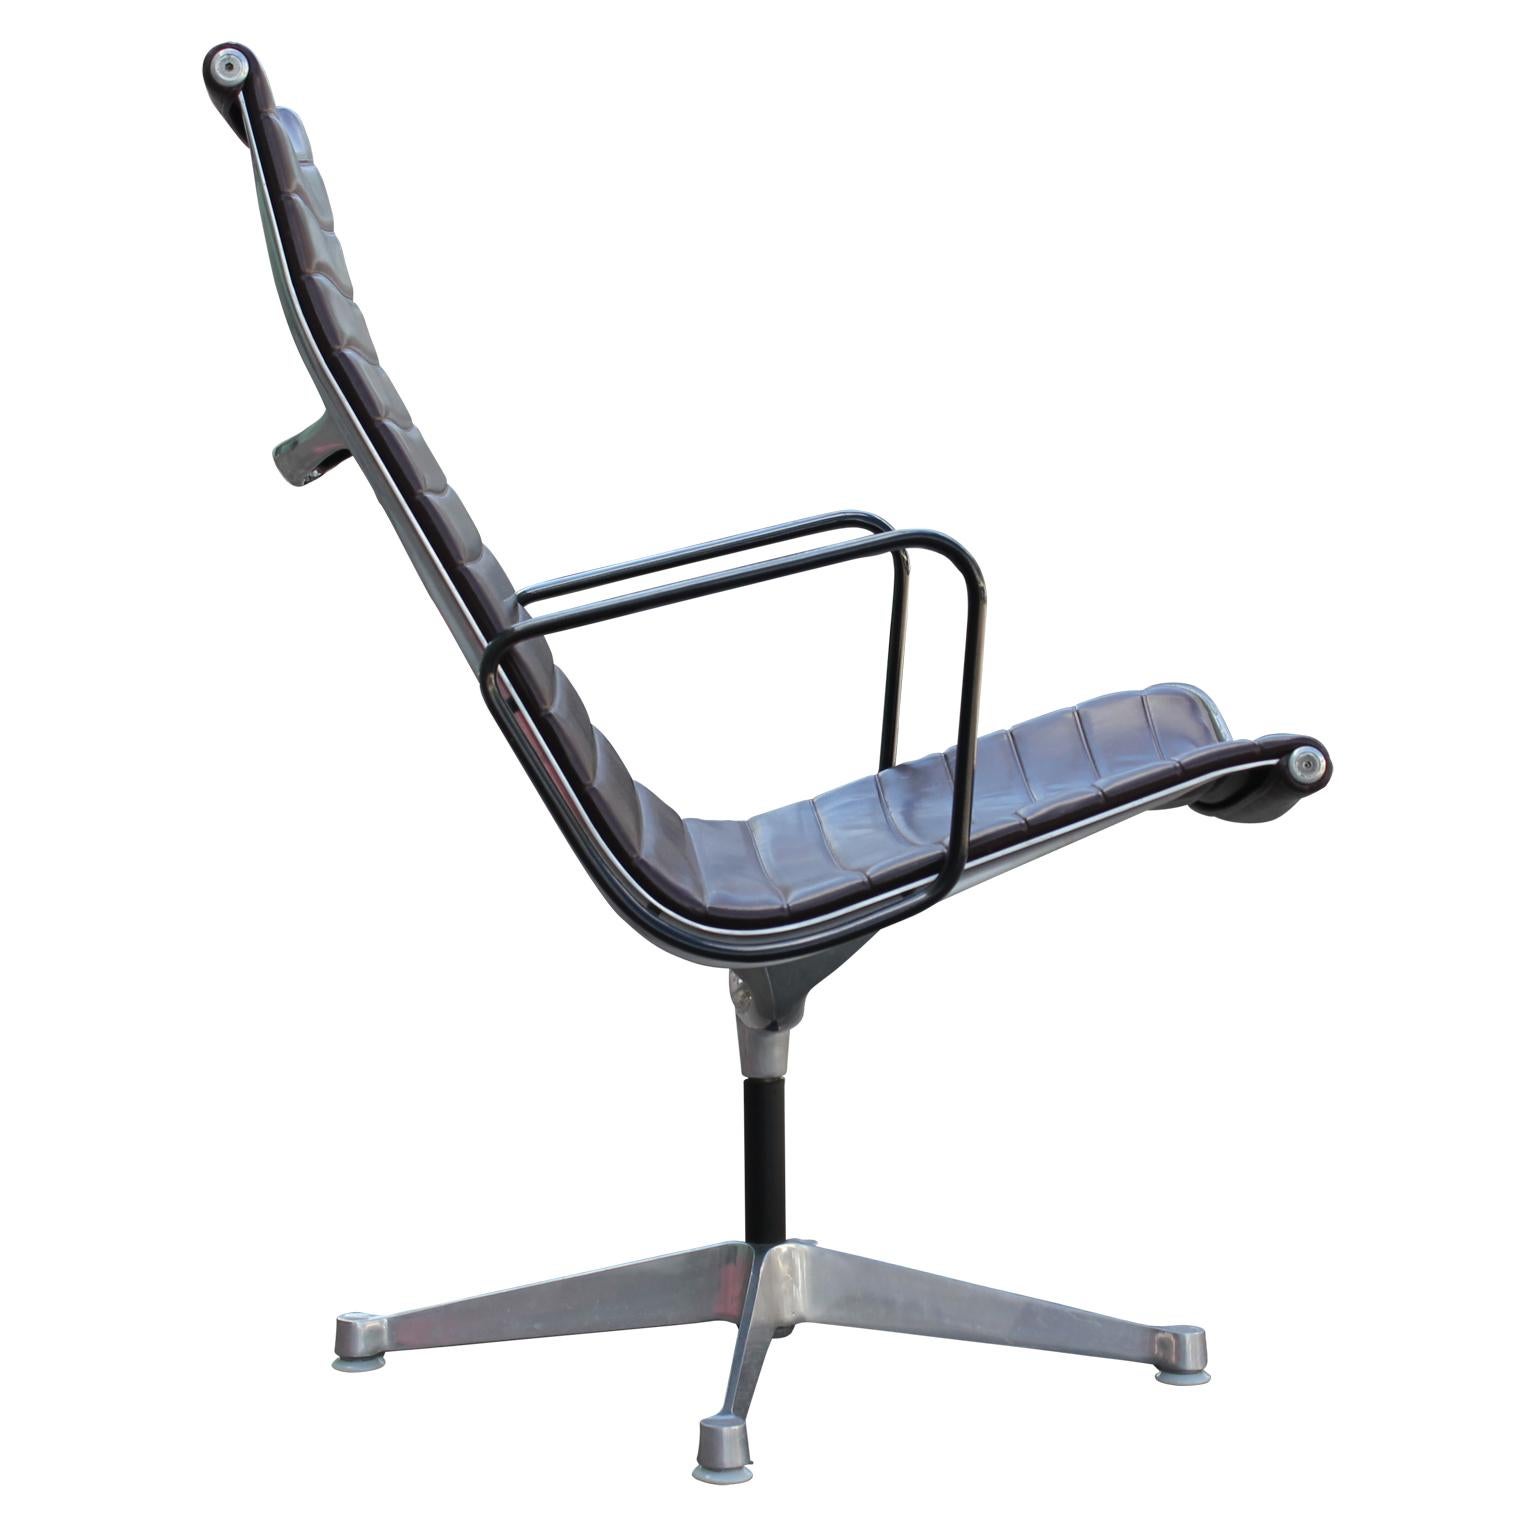 Mid-20th Century Modern Charles Eames for Herman Miller Aluminium Group Lounge Chair with Arms